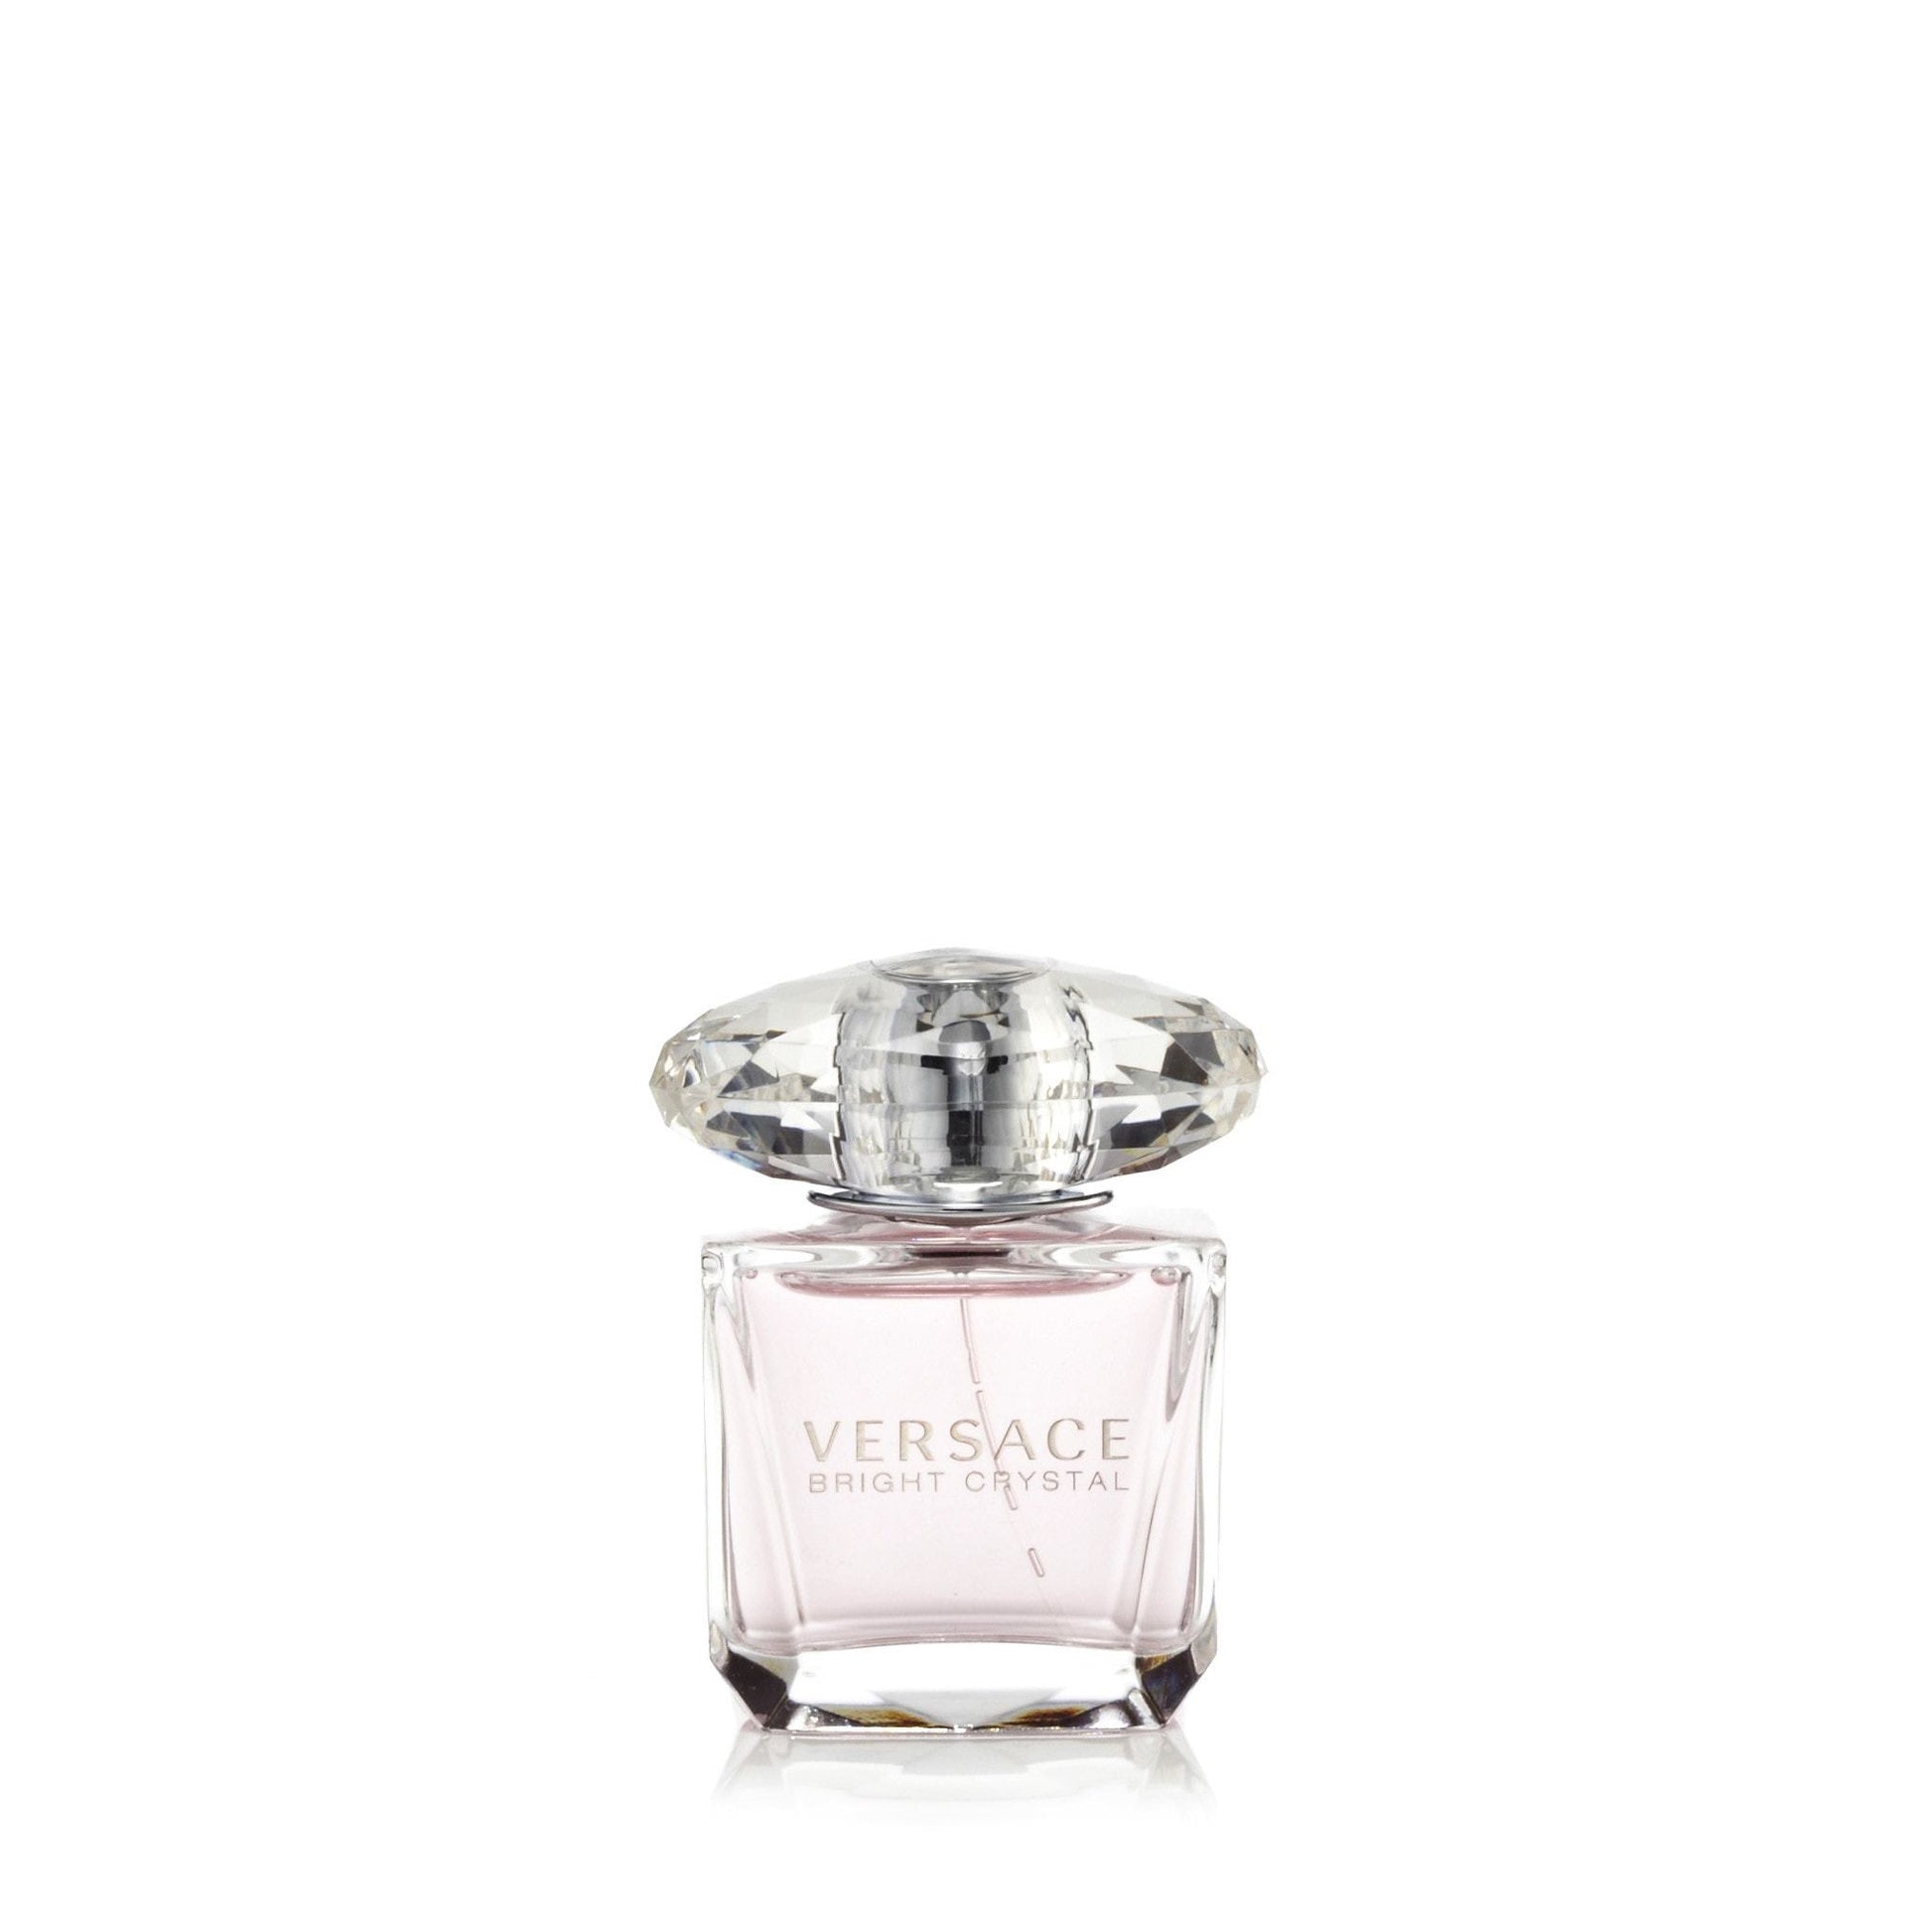 Bright Crystal Eau de Toilette Spray for Women by Versace, Product image 4